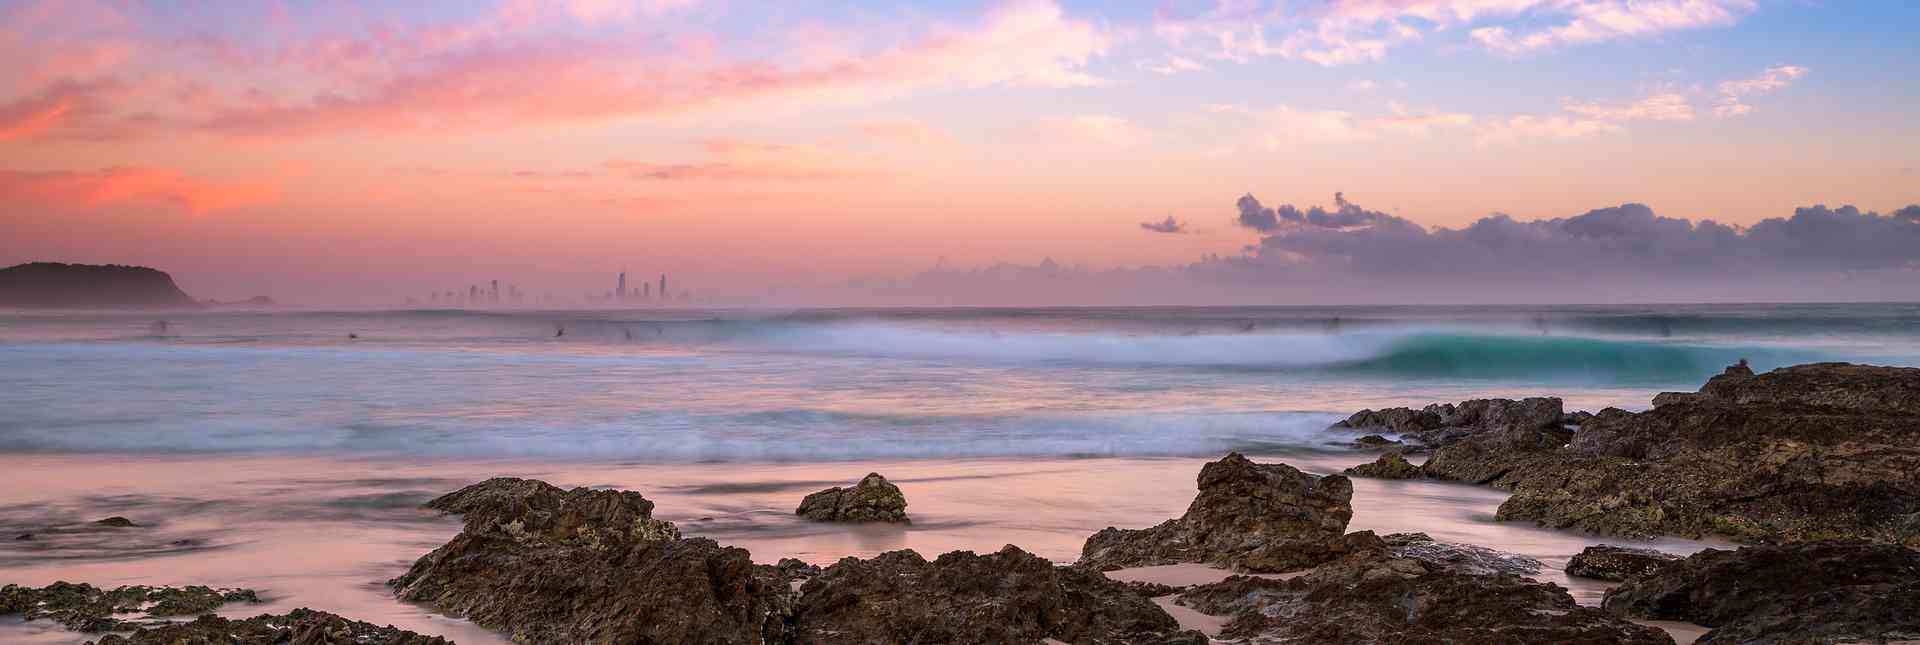 How To Spend Golden Hour on the Gold Coast